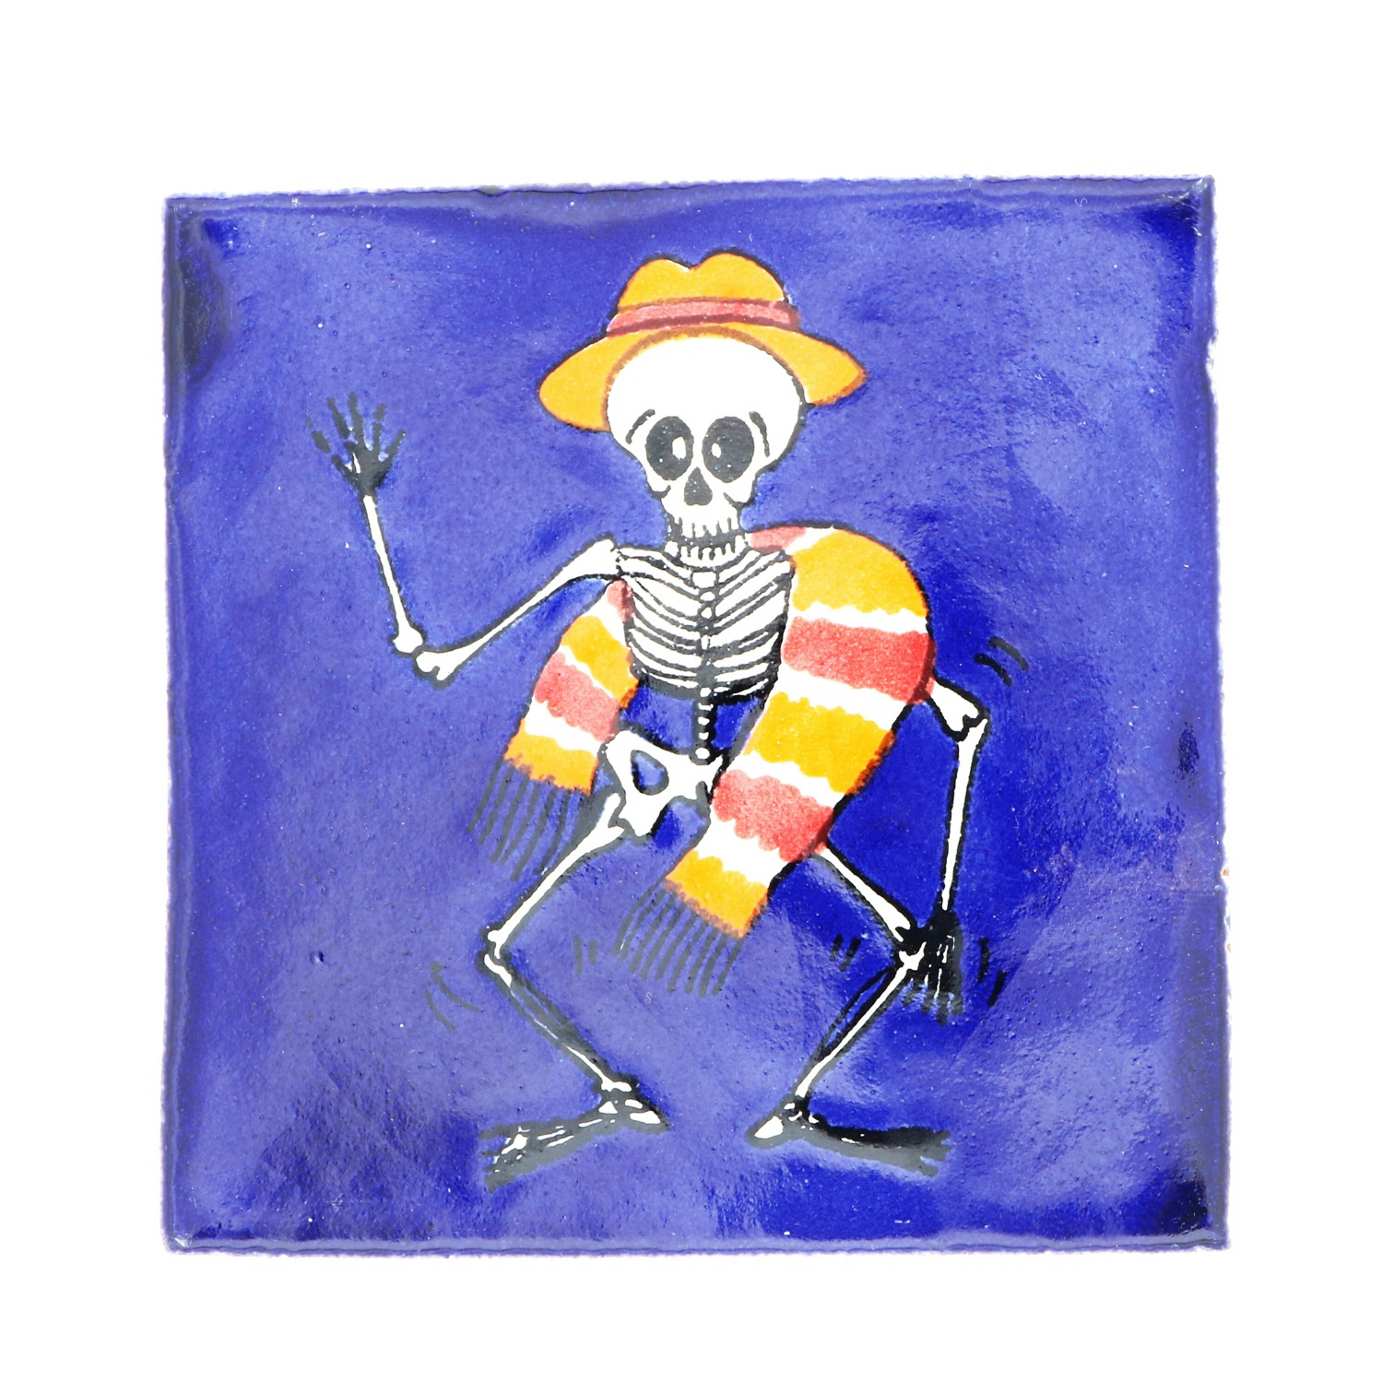 Blue Orange Pottery Day of the Dead 4" x 4" Decorative Tiles, Assorted Colors & Designs; image 2 of 5